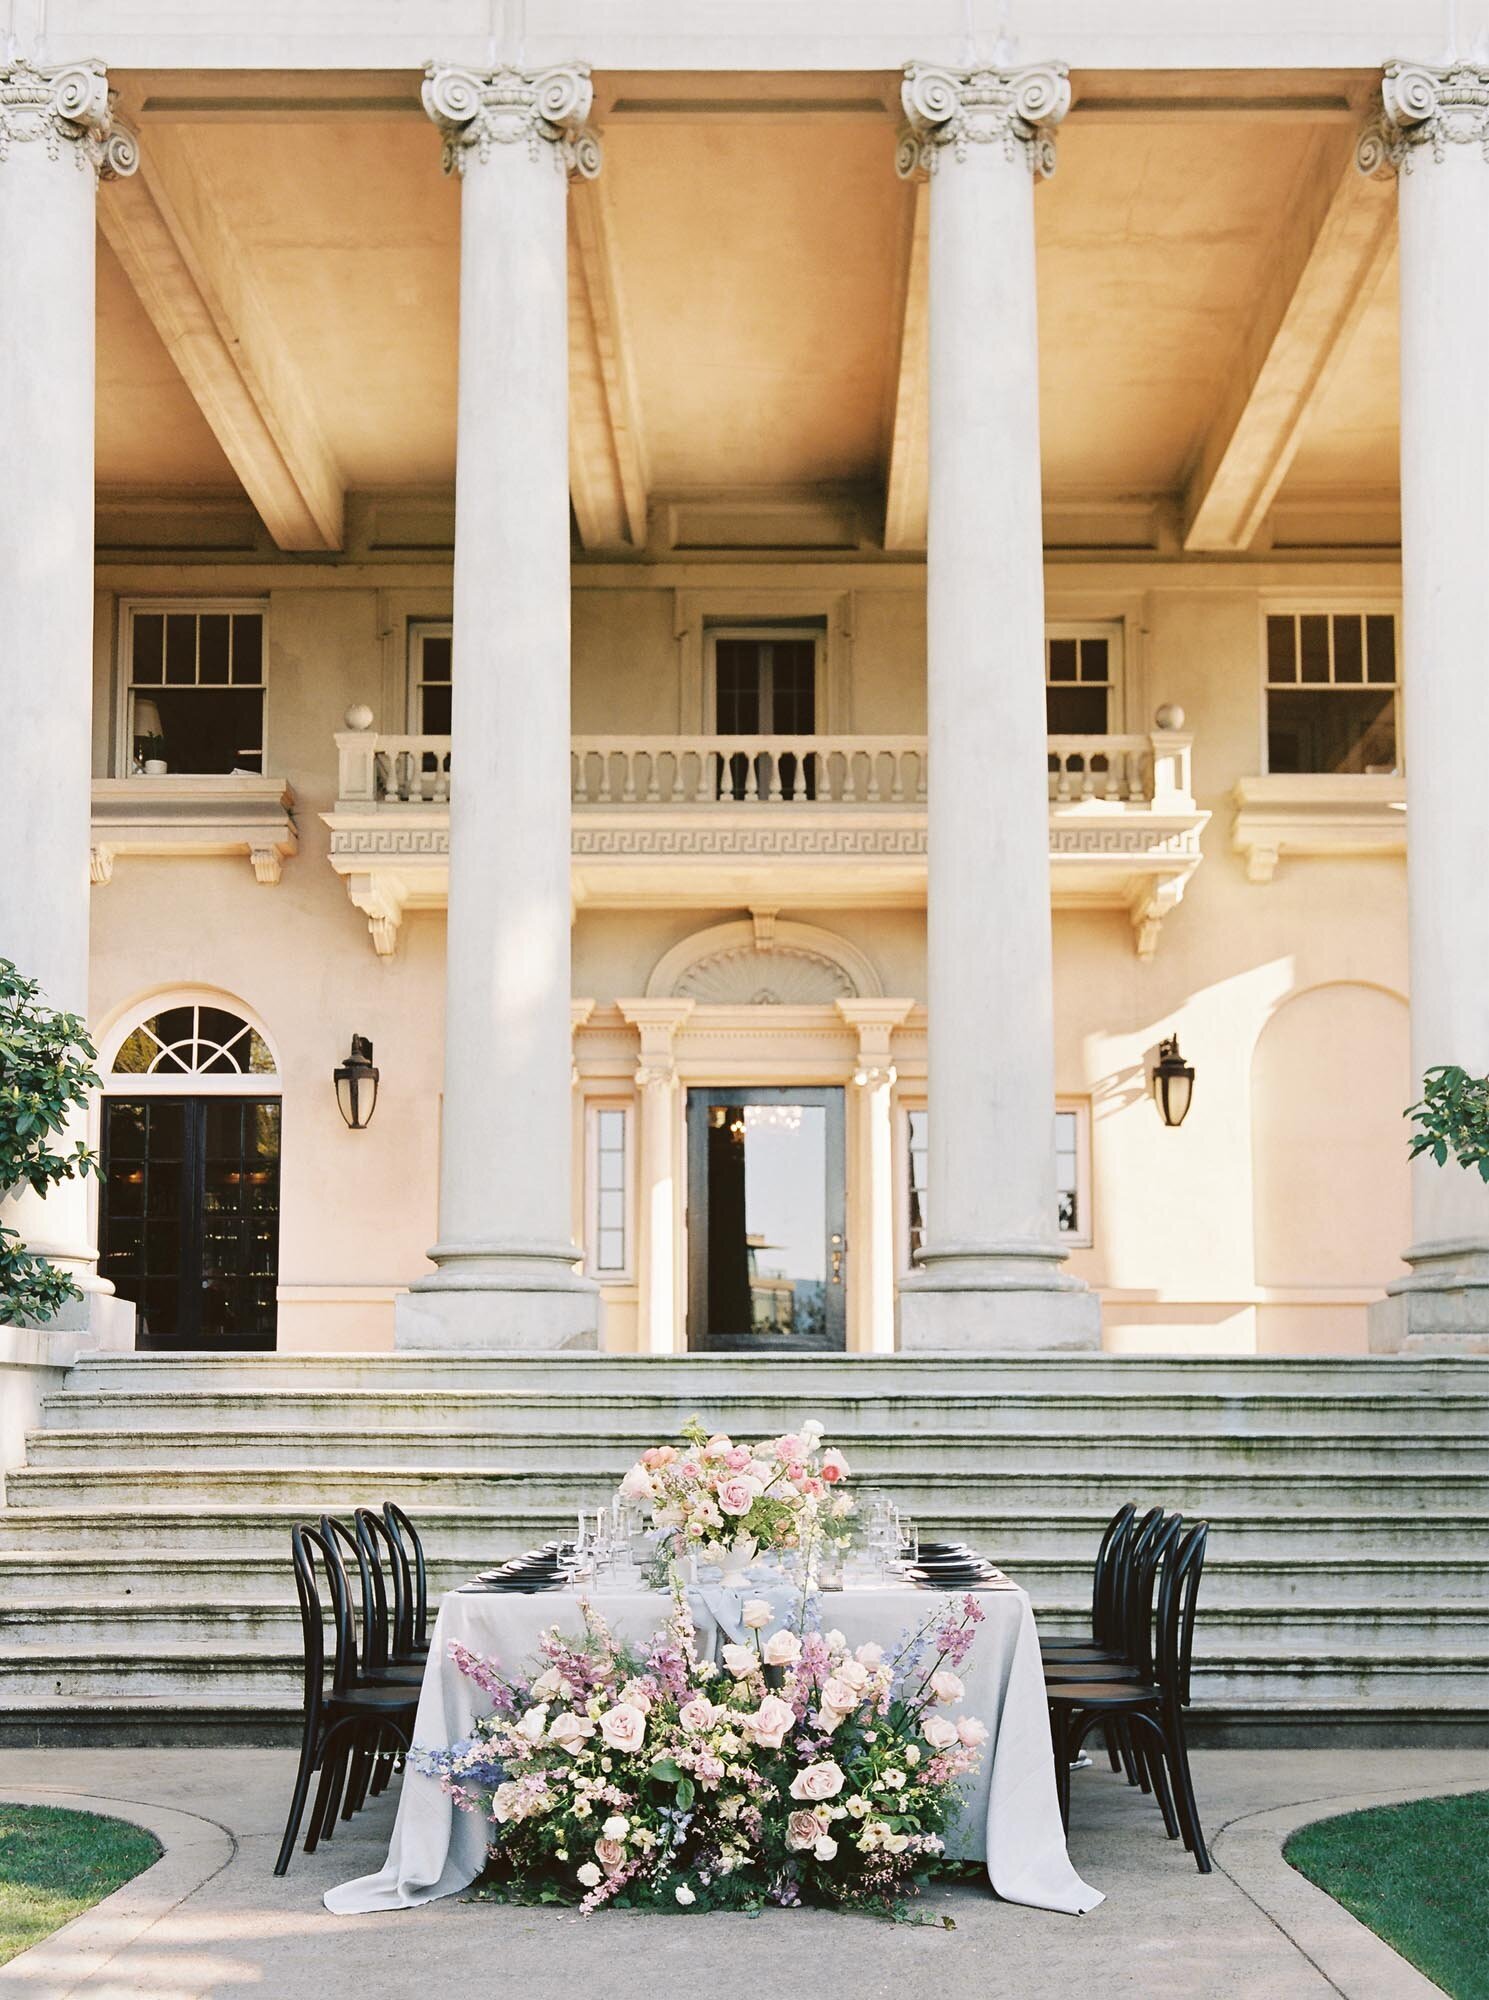 Wedding dining table in a mansion